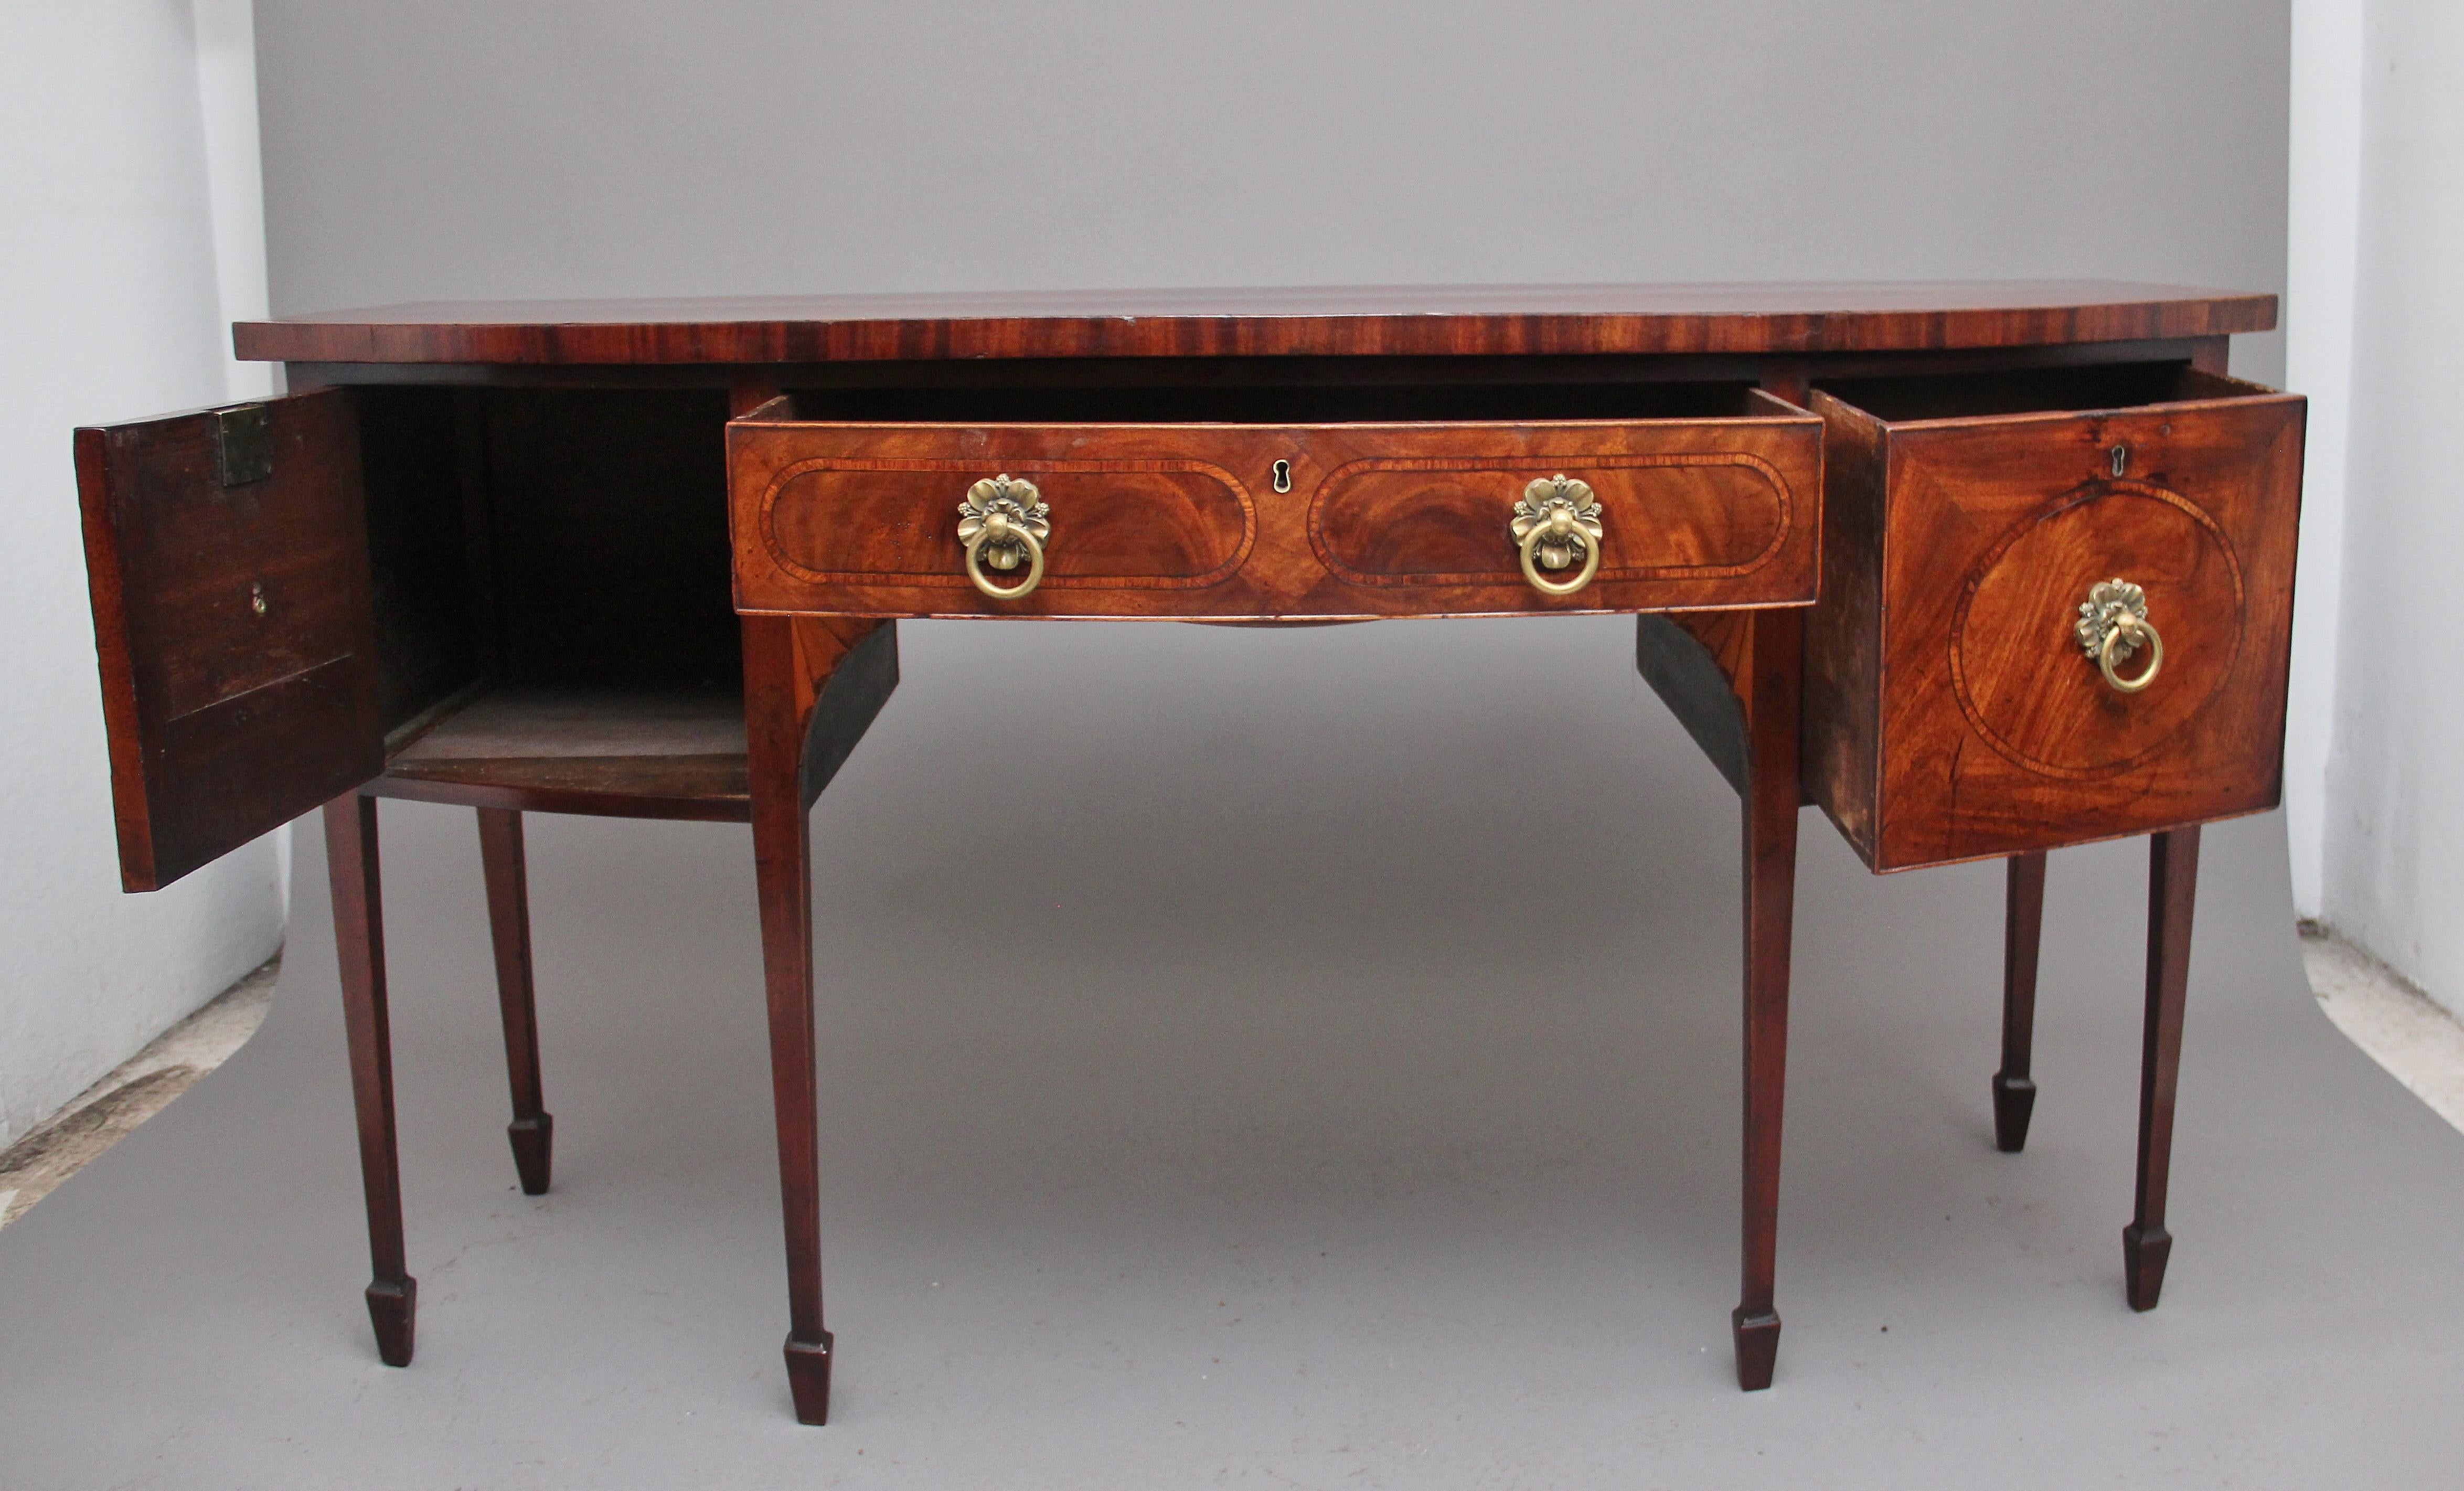 Early 19th century mahogany bow front sideboard, having a lovely figured top and crossbanded around the edge, having a central oak lined drawer below flanked either side with a cupboard and a deep oak lined cellerette drawer, the drawer fronts